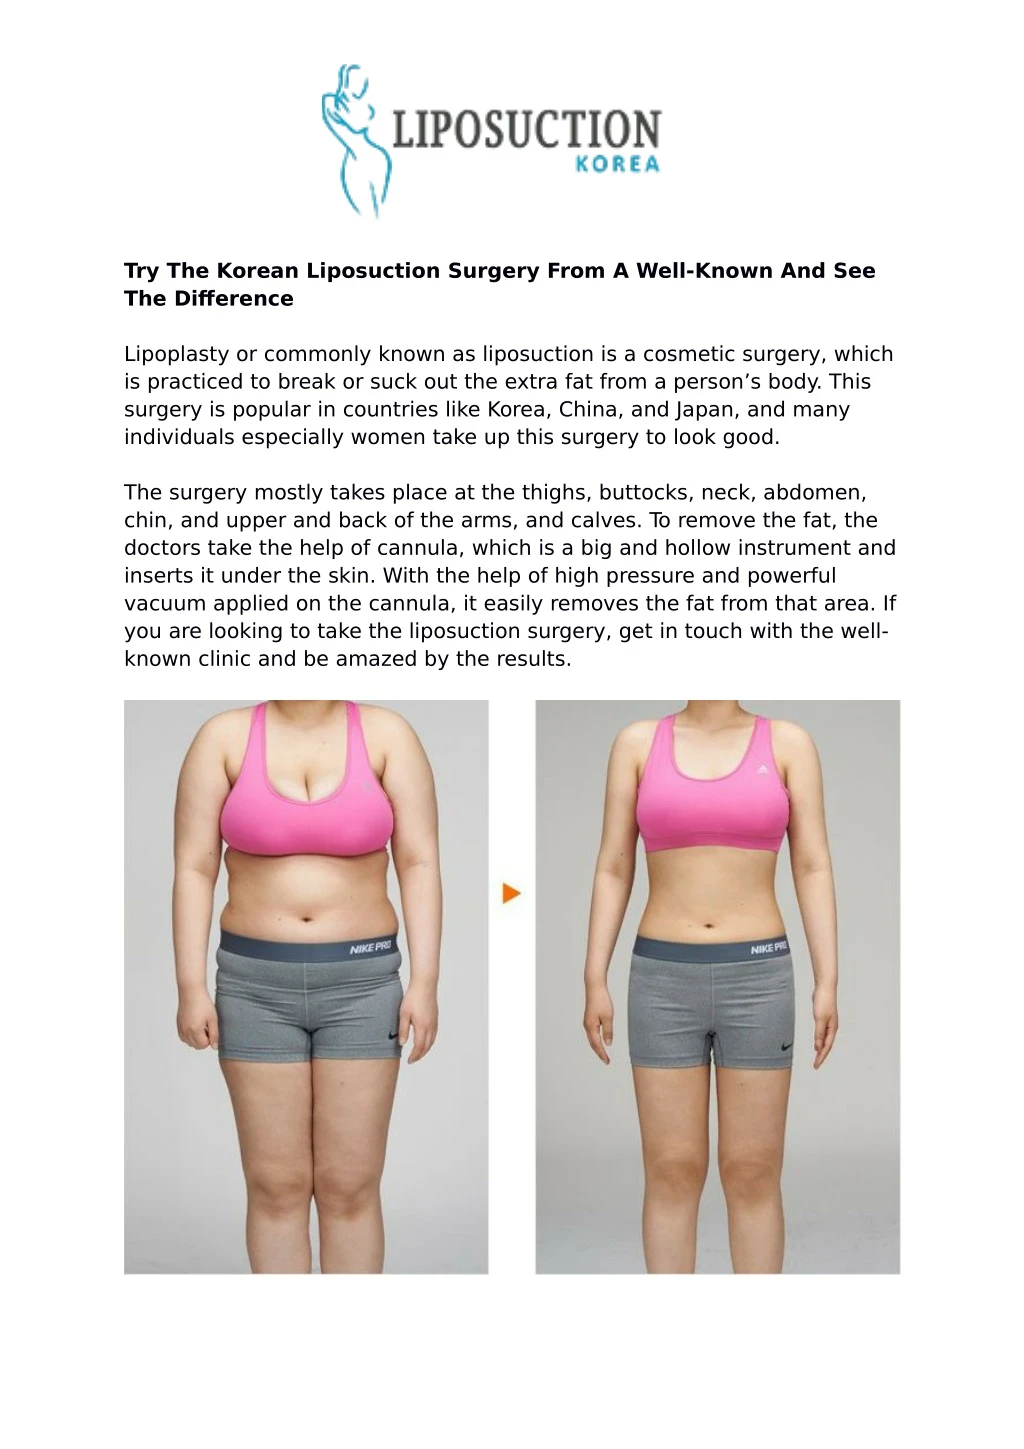 try the korean liposuction surgery from a well